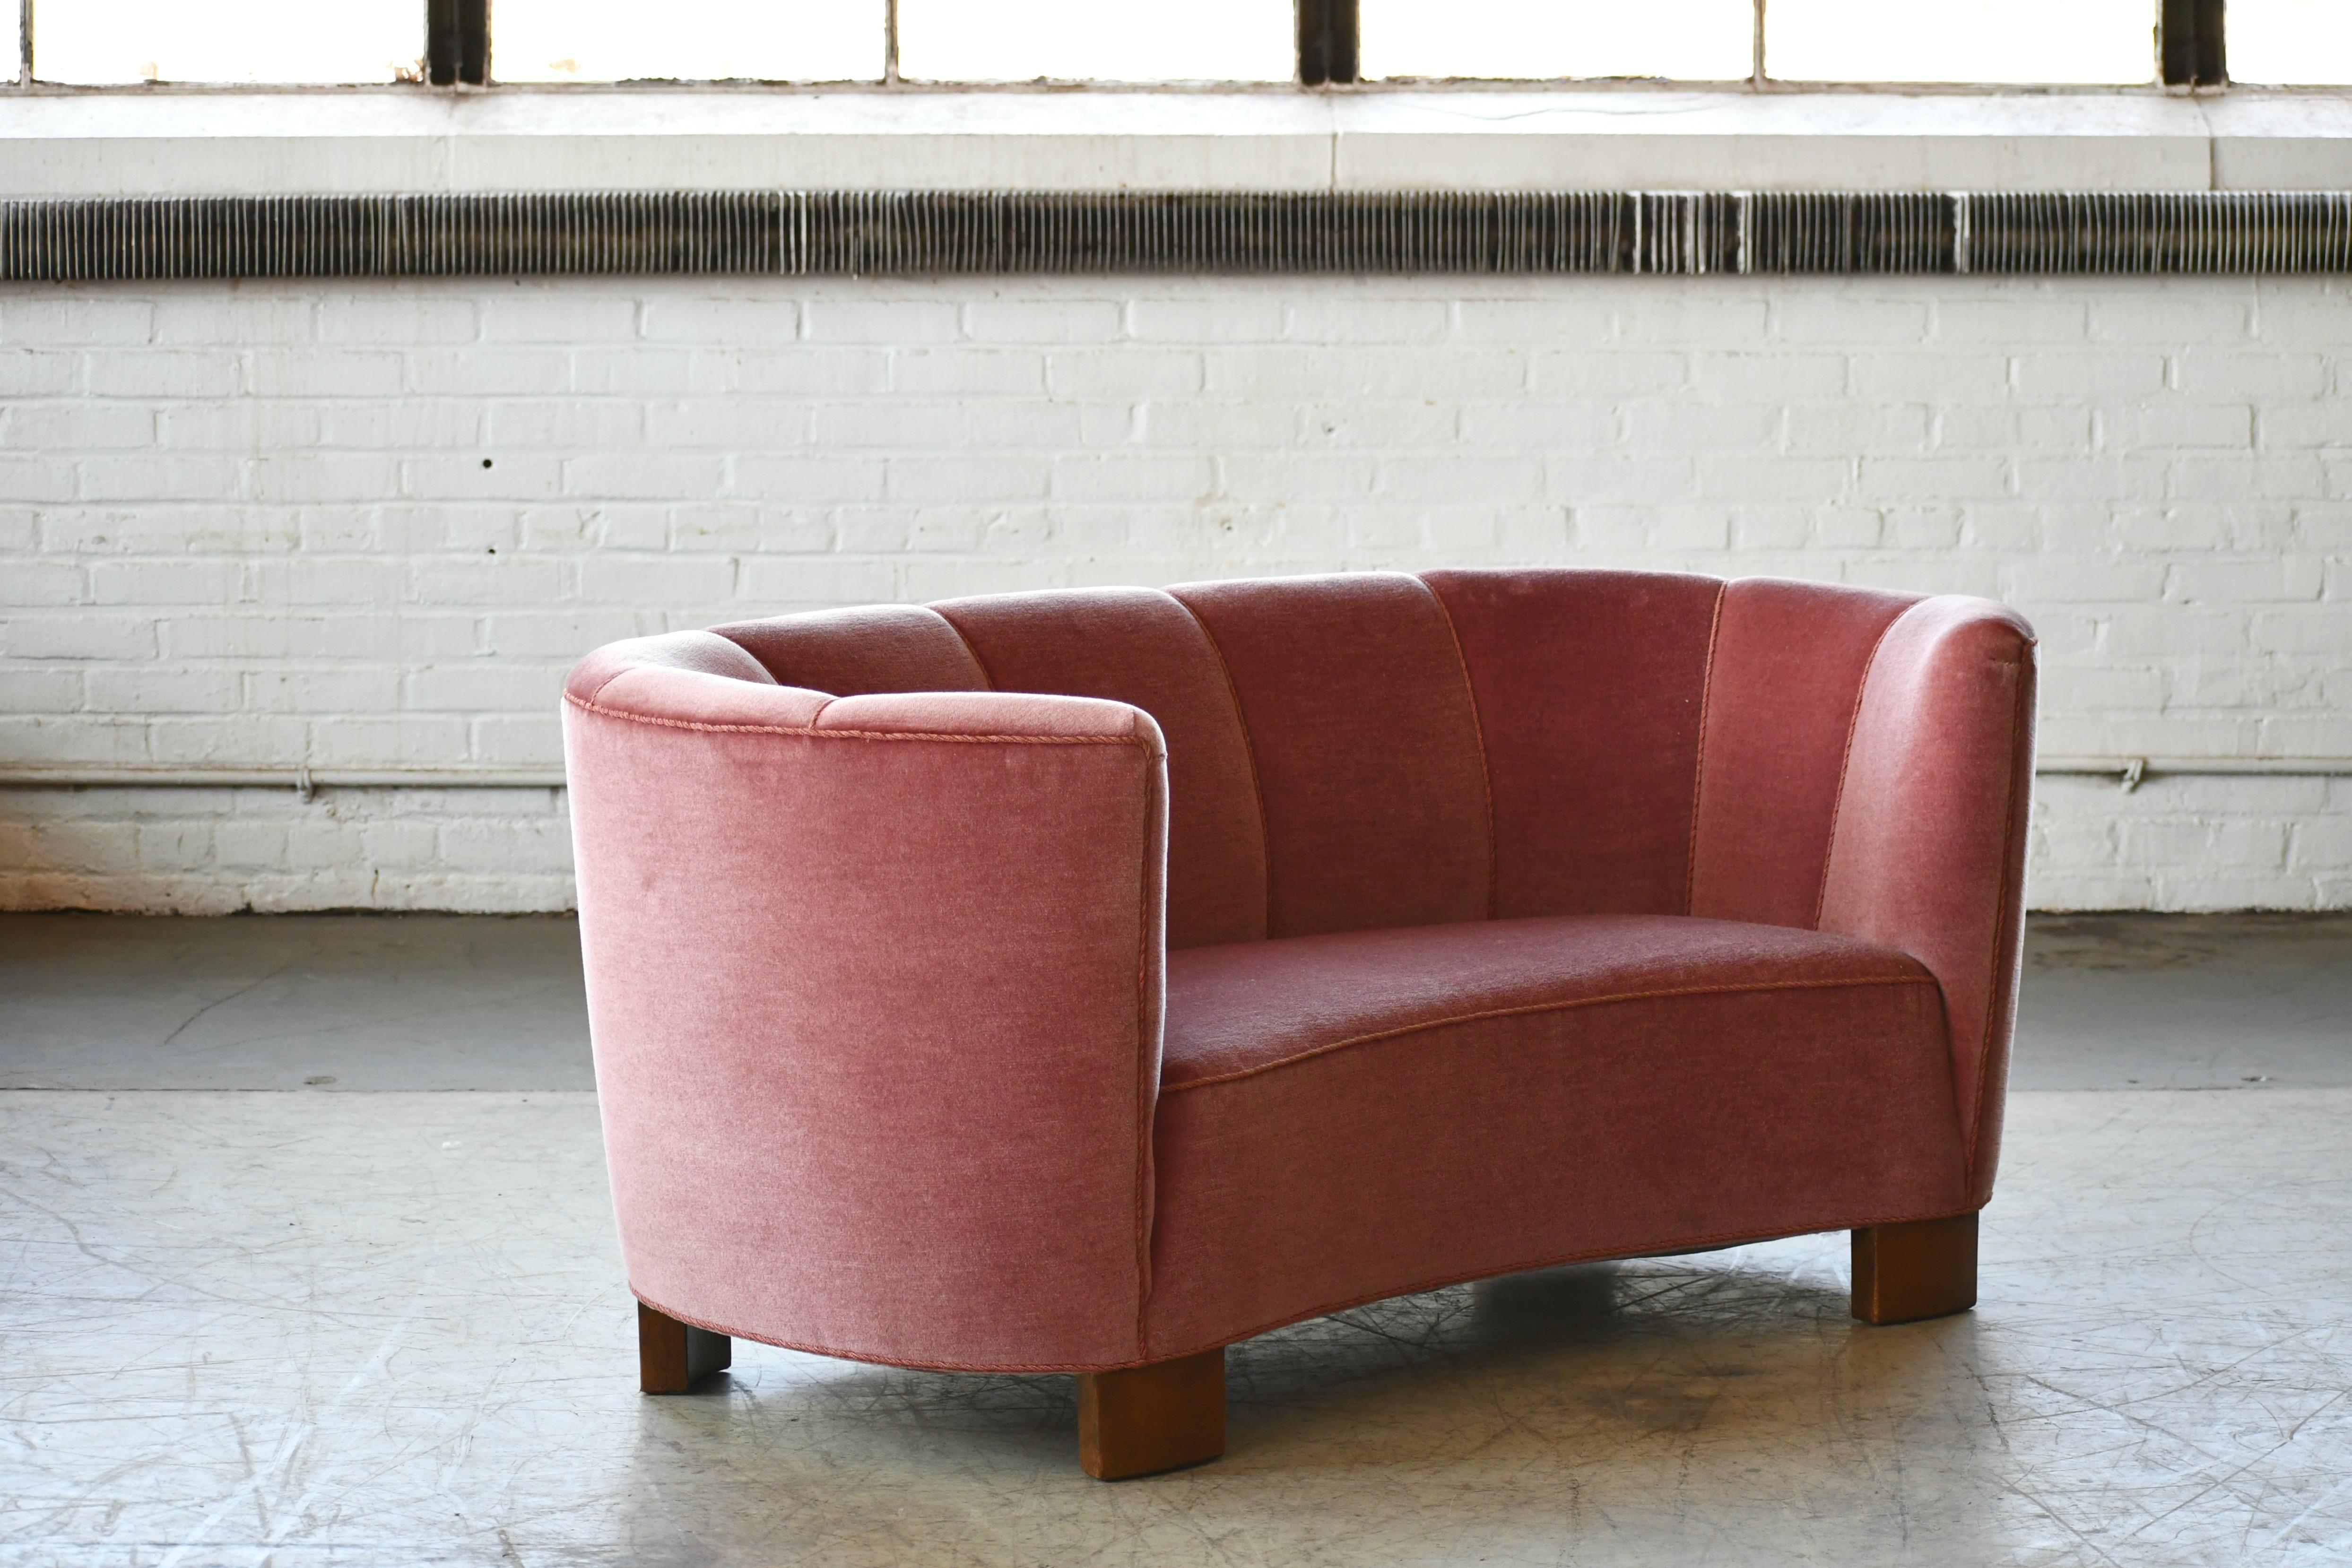 Beautiful and very elegant 1940s curved two-seat sofa or in rose pink mohair wool fabric. The sofa has springs in the seat and the backrest and the cushions are nice and firm and the sofa very sturdy. The sofa was re-upholstered in recent years and